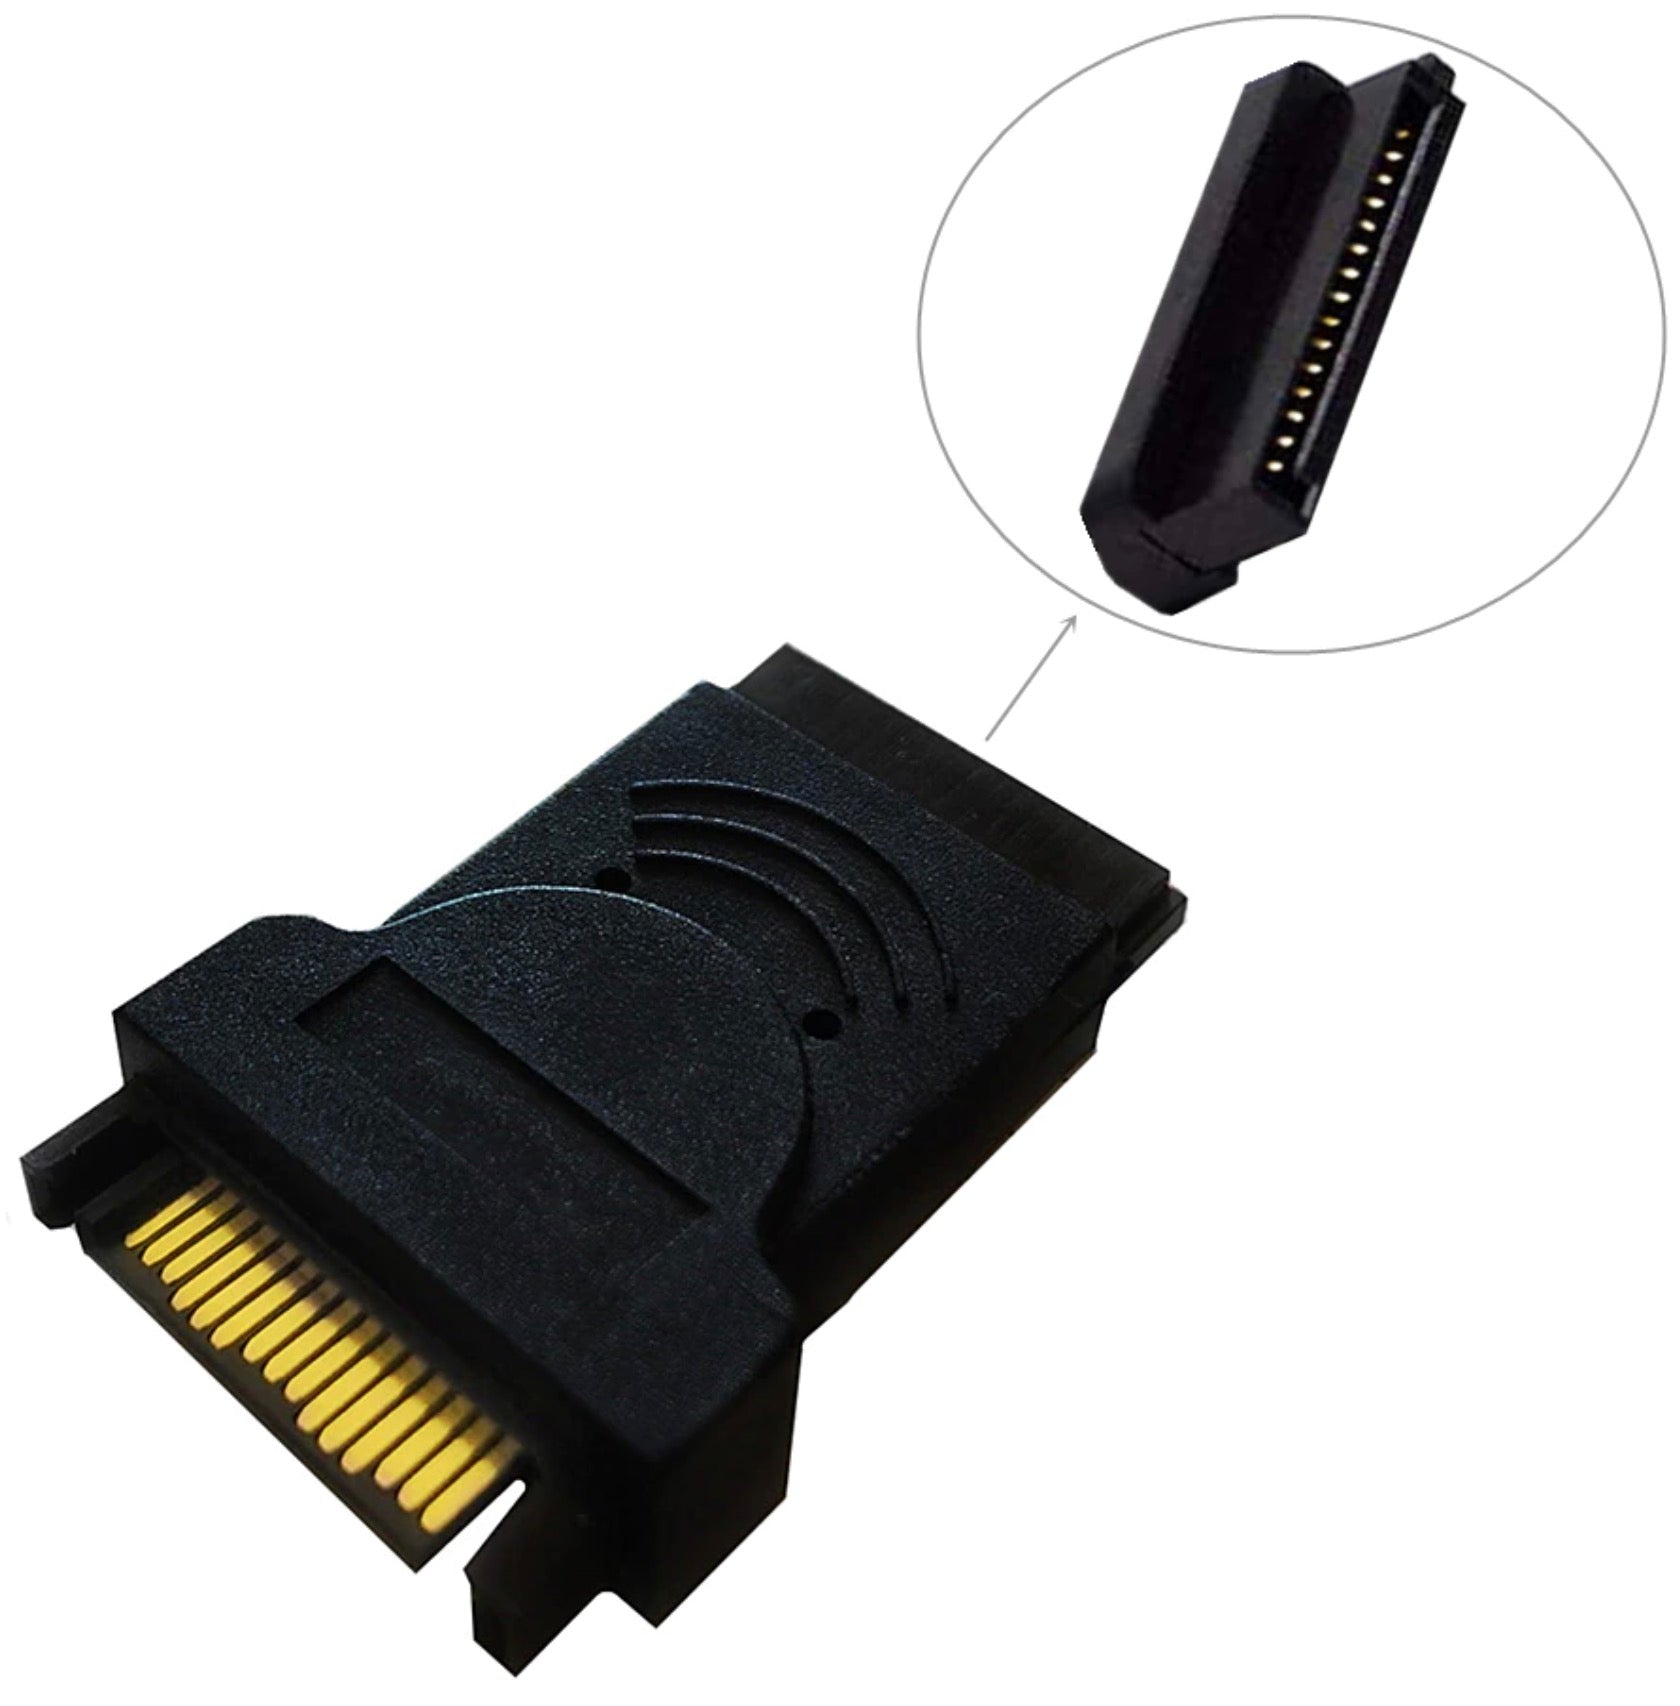 15-Pin SATA Power Extension Adapter for HDD, SSD, Optical Drives